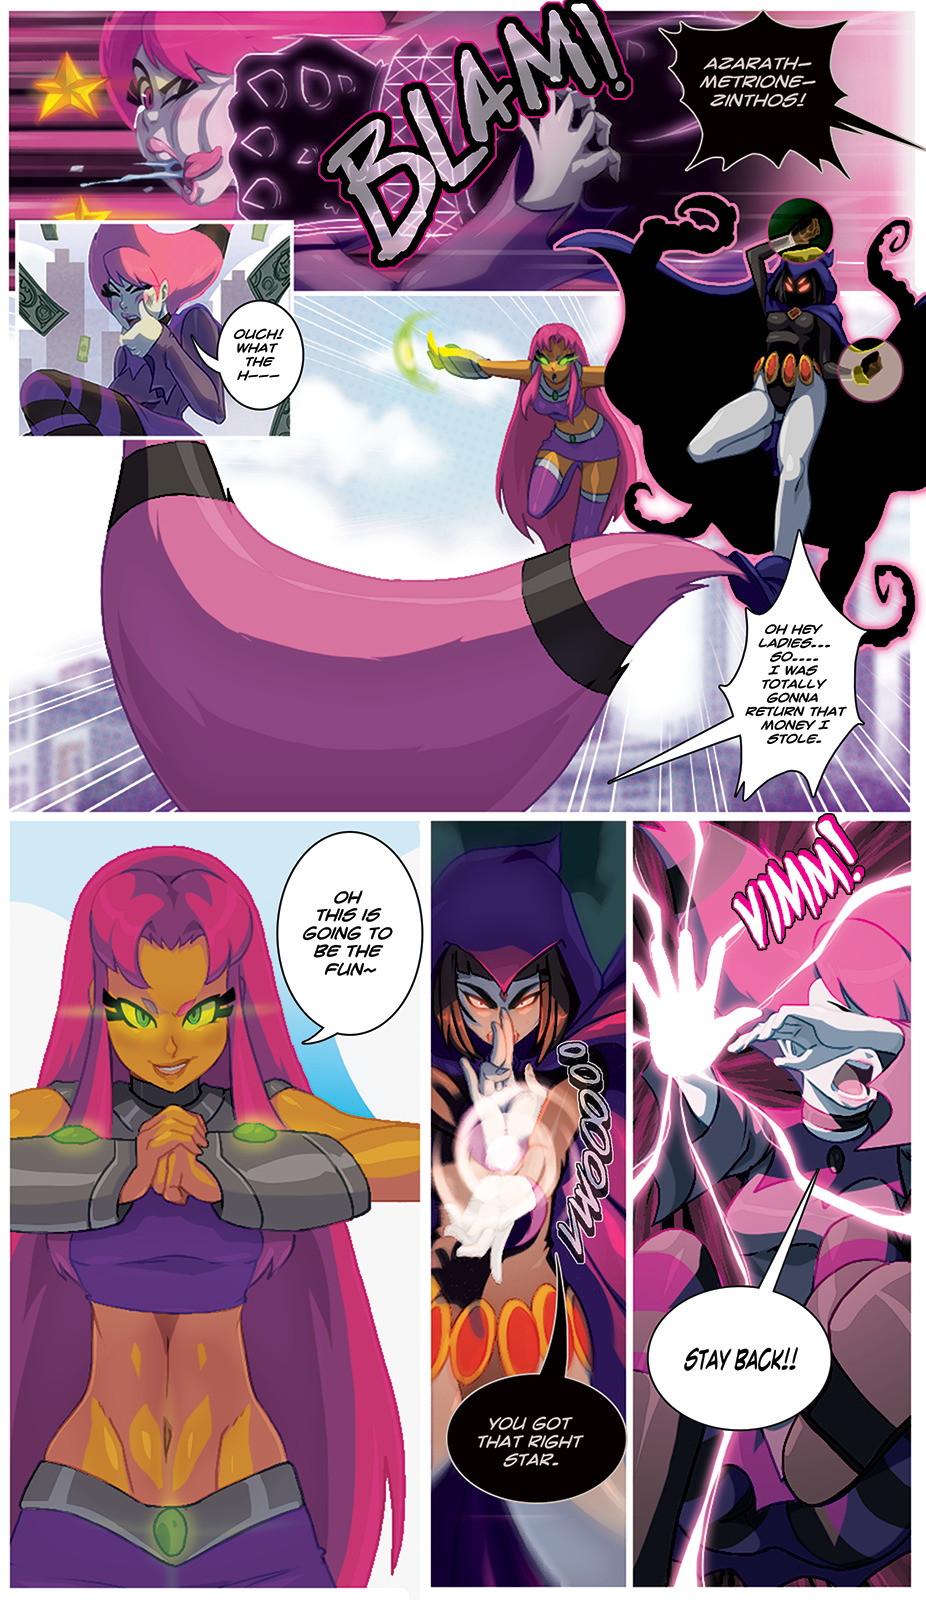 tovio-rogers:  “Jinxed” a 3 page short commissioned kamenrider1 on deviantart